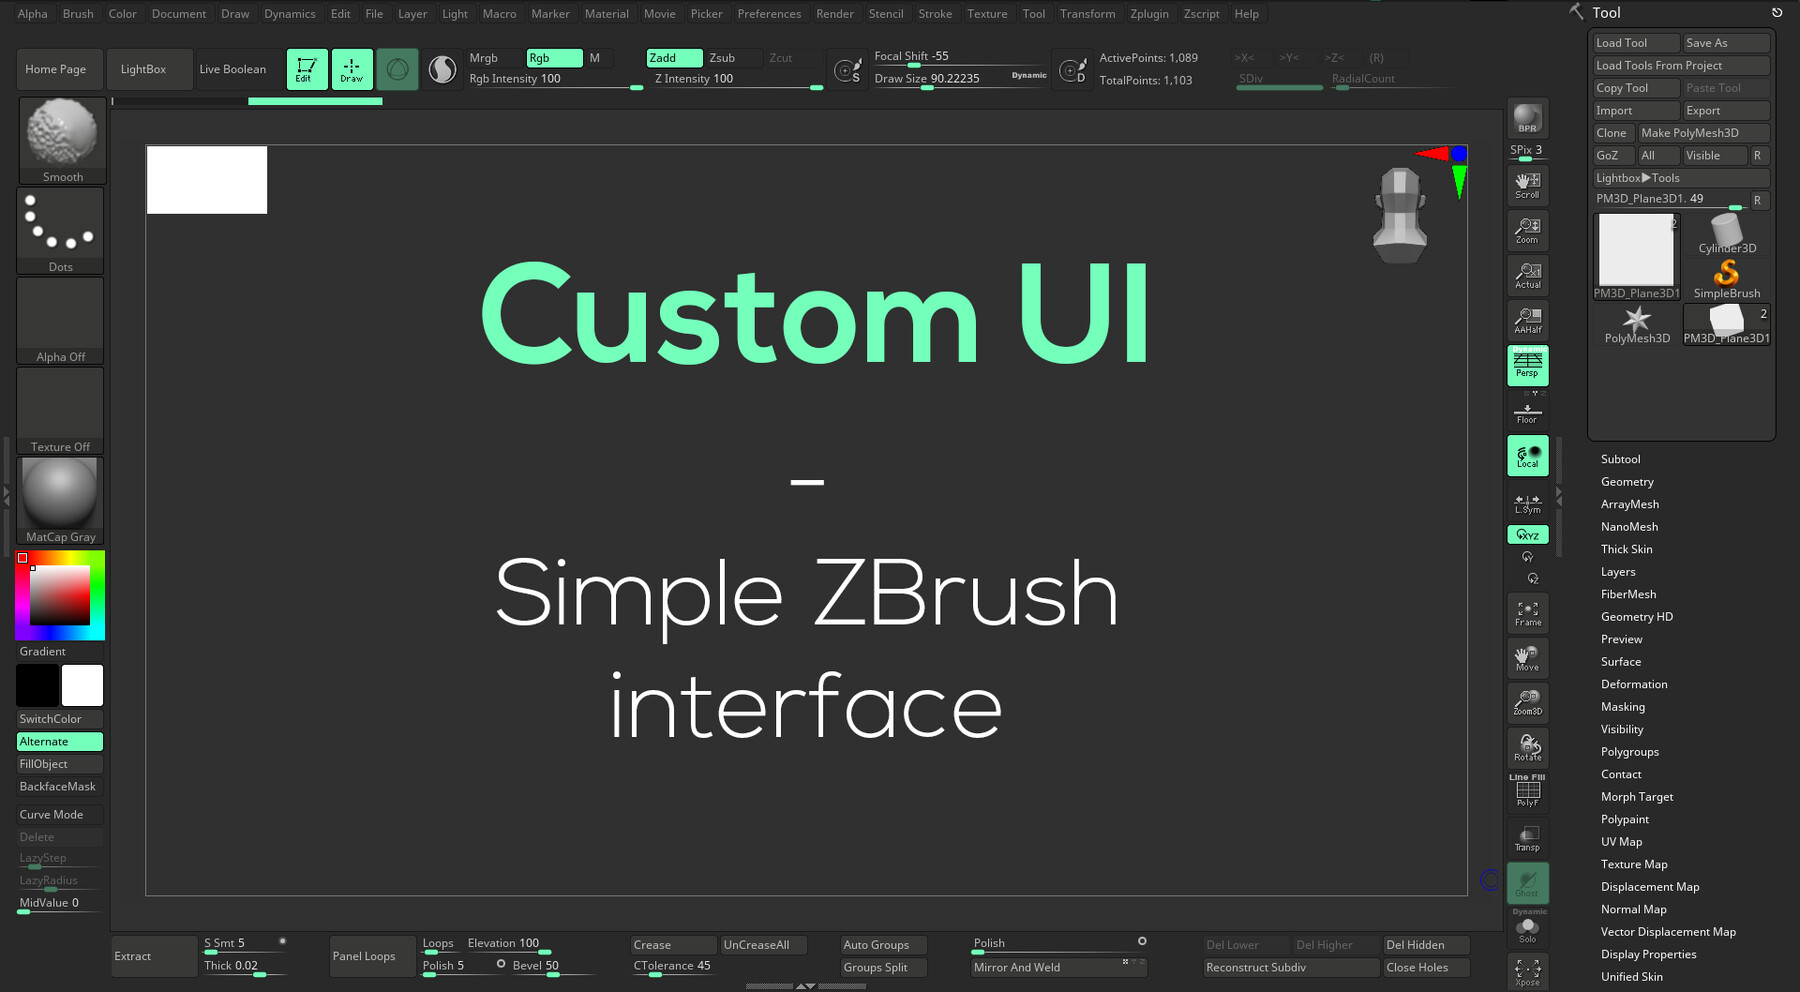 enable customize zbrush ui disappears xpose button